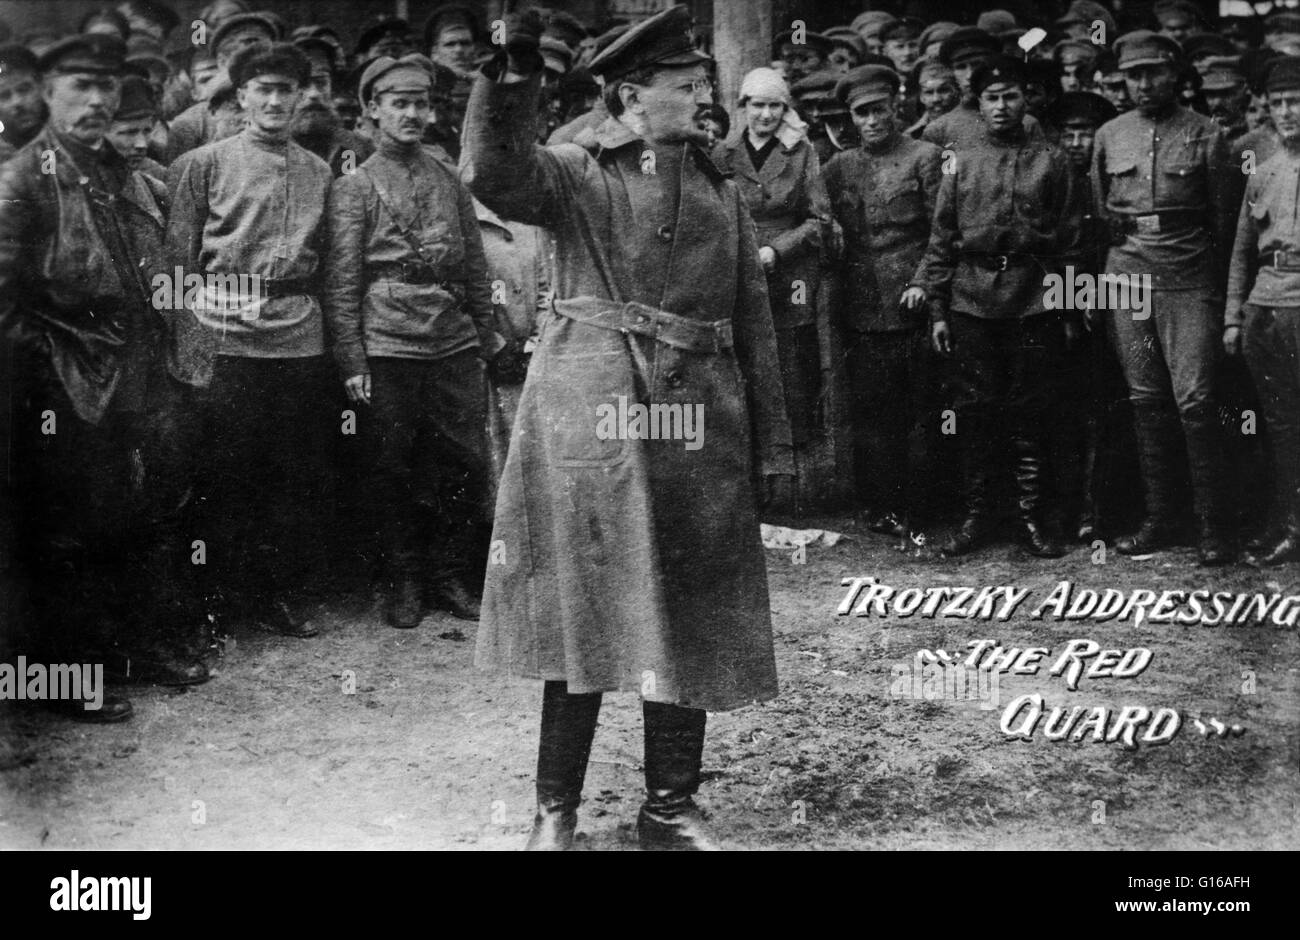 Bain News Service photograph of Trotsky and the Red Guard. No date recorded on caption card. Leon Trotsky (November 7, 1879 - August 21, 1940) was a Russian Marxist revolutionary and theorist. He joined the Bolsheviks prior to the 1917 October Revolution Stock Photo